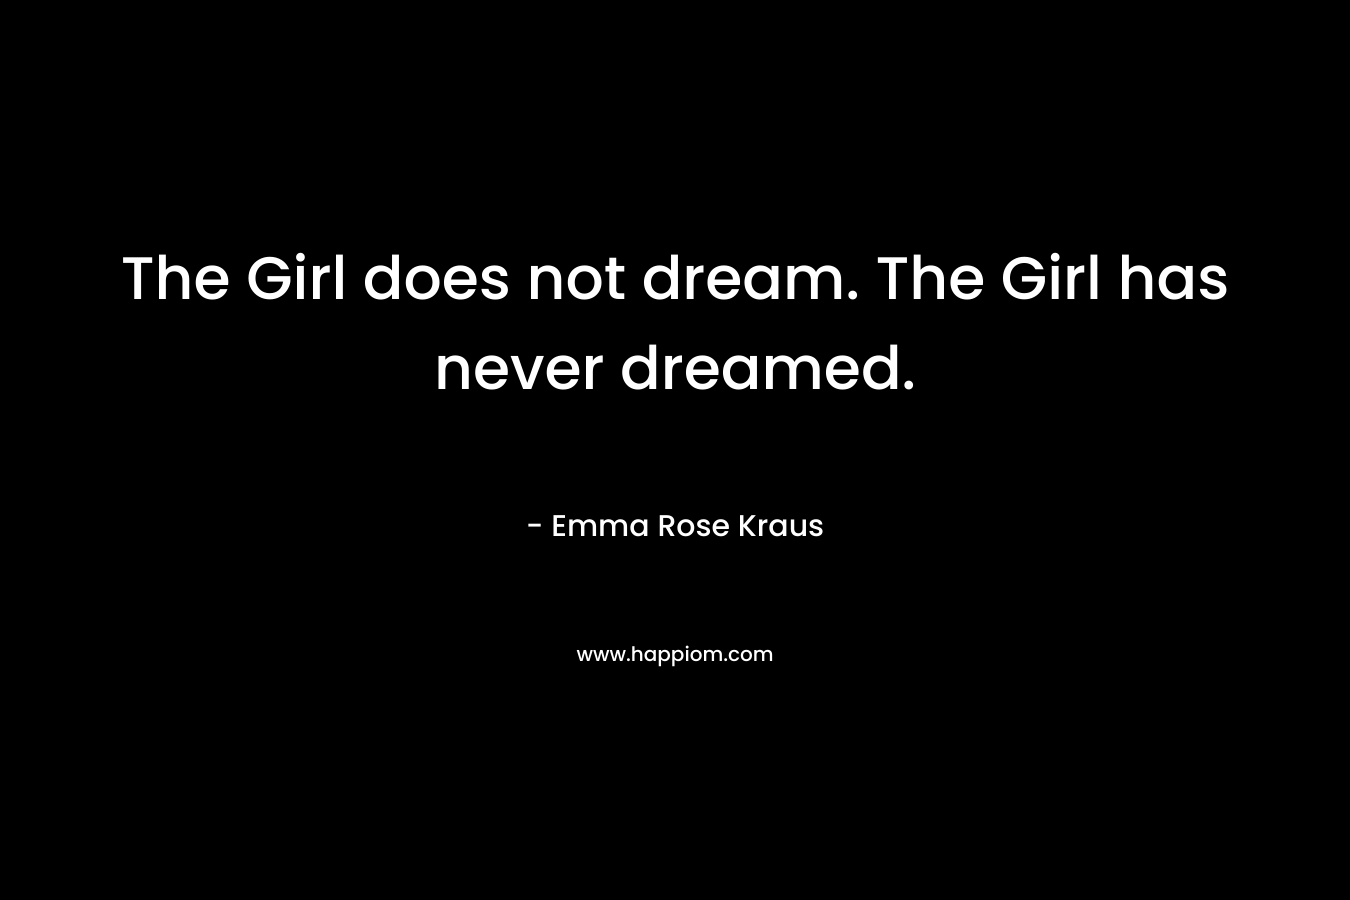 The Girl does not dream. The Girl has never dreamed.